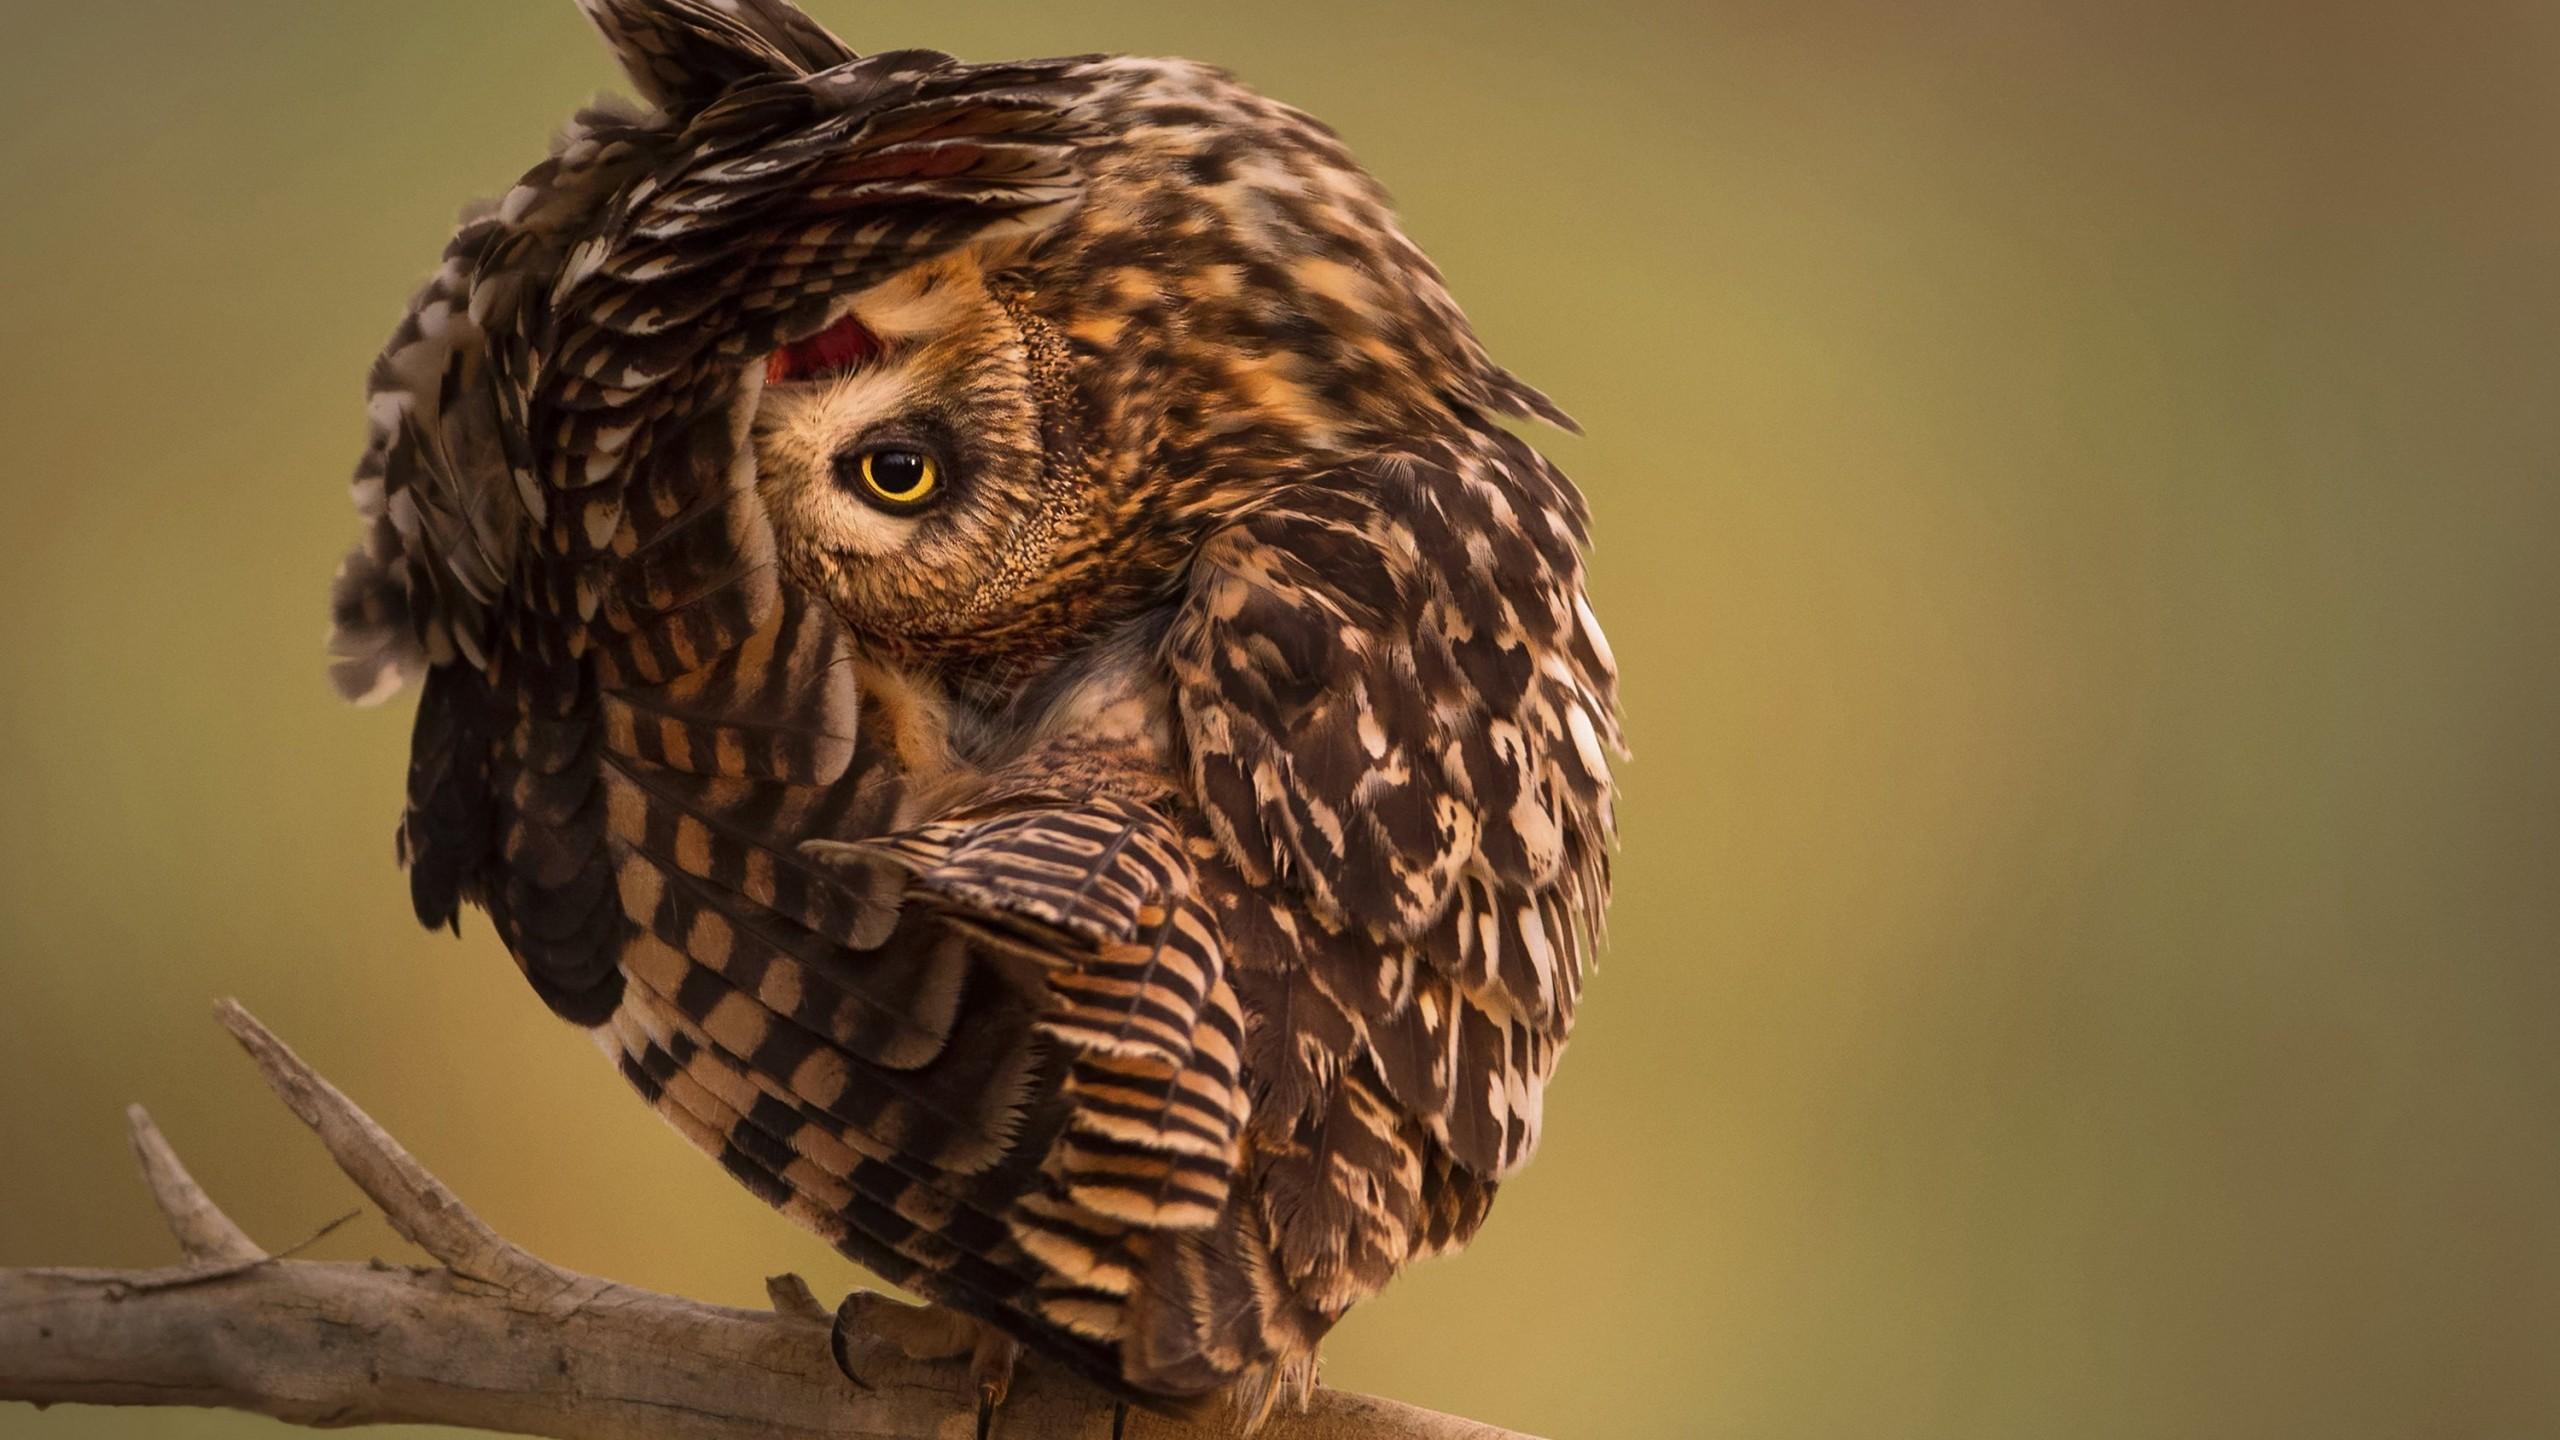 Wallpaper National Geographic, 4k, HD wallpaper, Owl, Funny